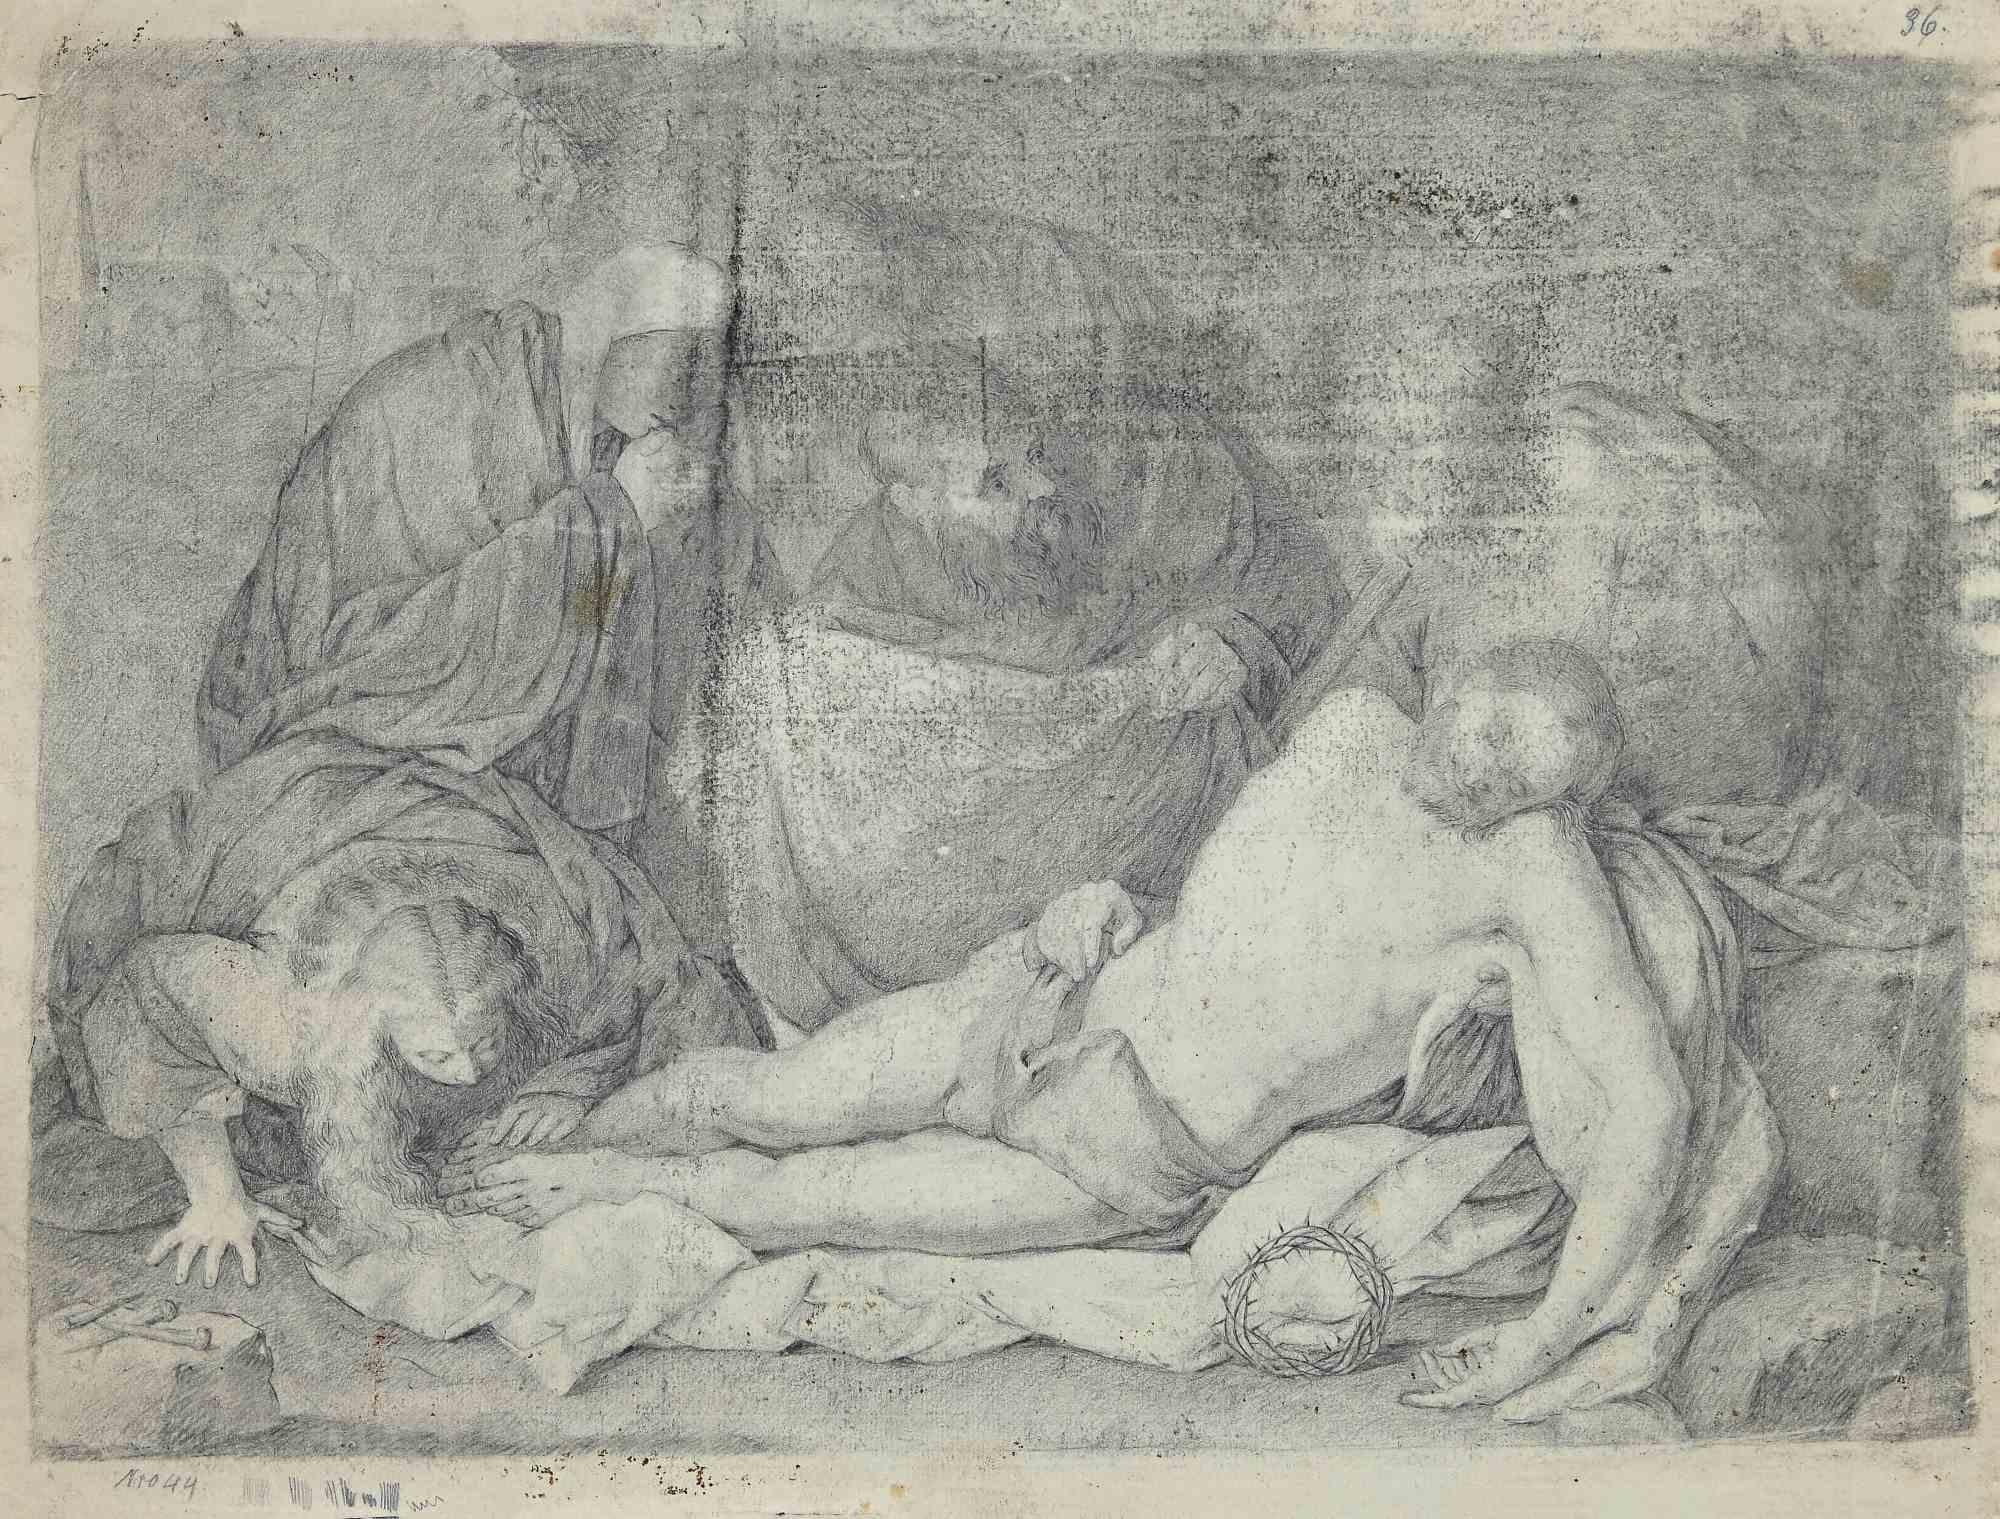 Dead Jesus is an Original pencil drawing realized by August Anton Tischbein in 19th century.

The artwork is in good condition.

No signature, numbered on the upper right corner n. 36.

August Anton Tischbein was born in Rostock (MeckIenburg) on